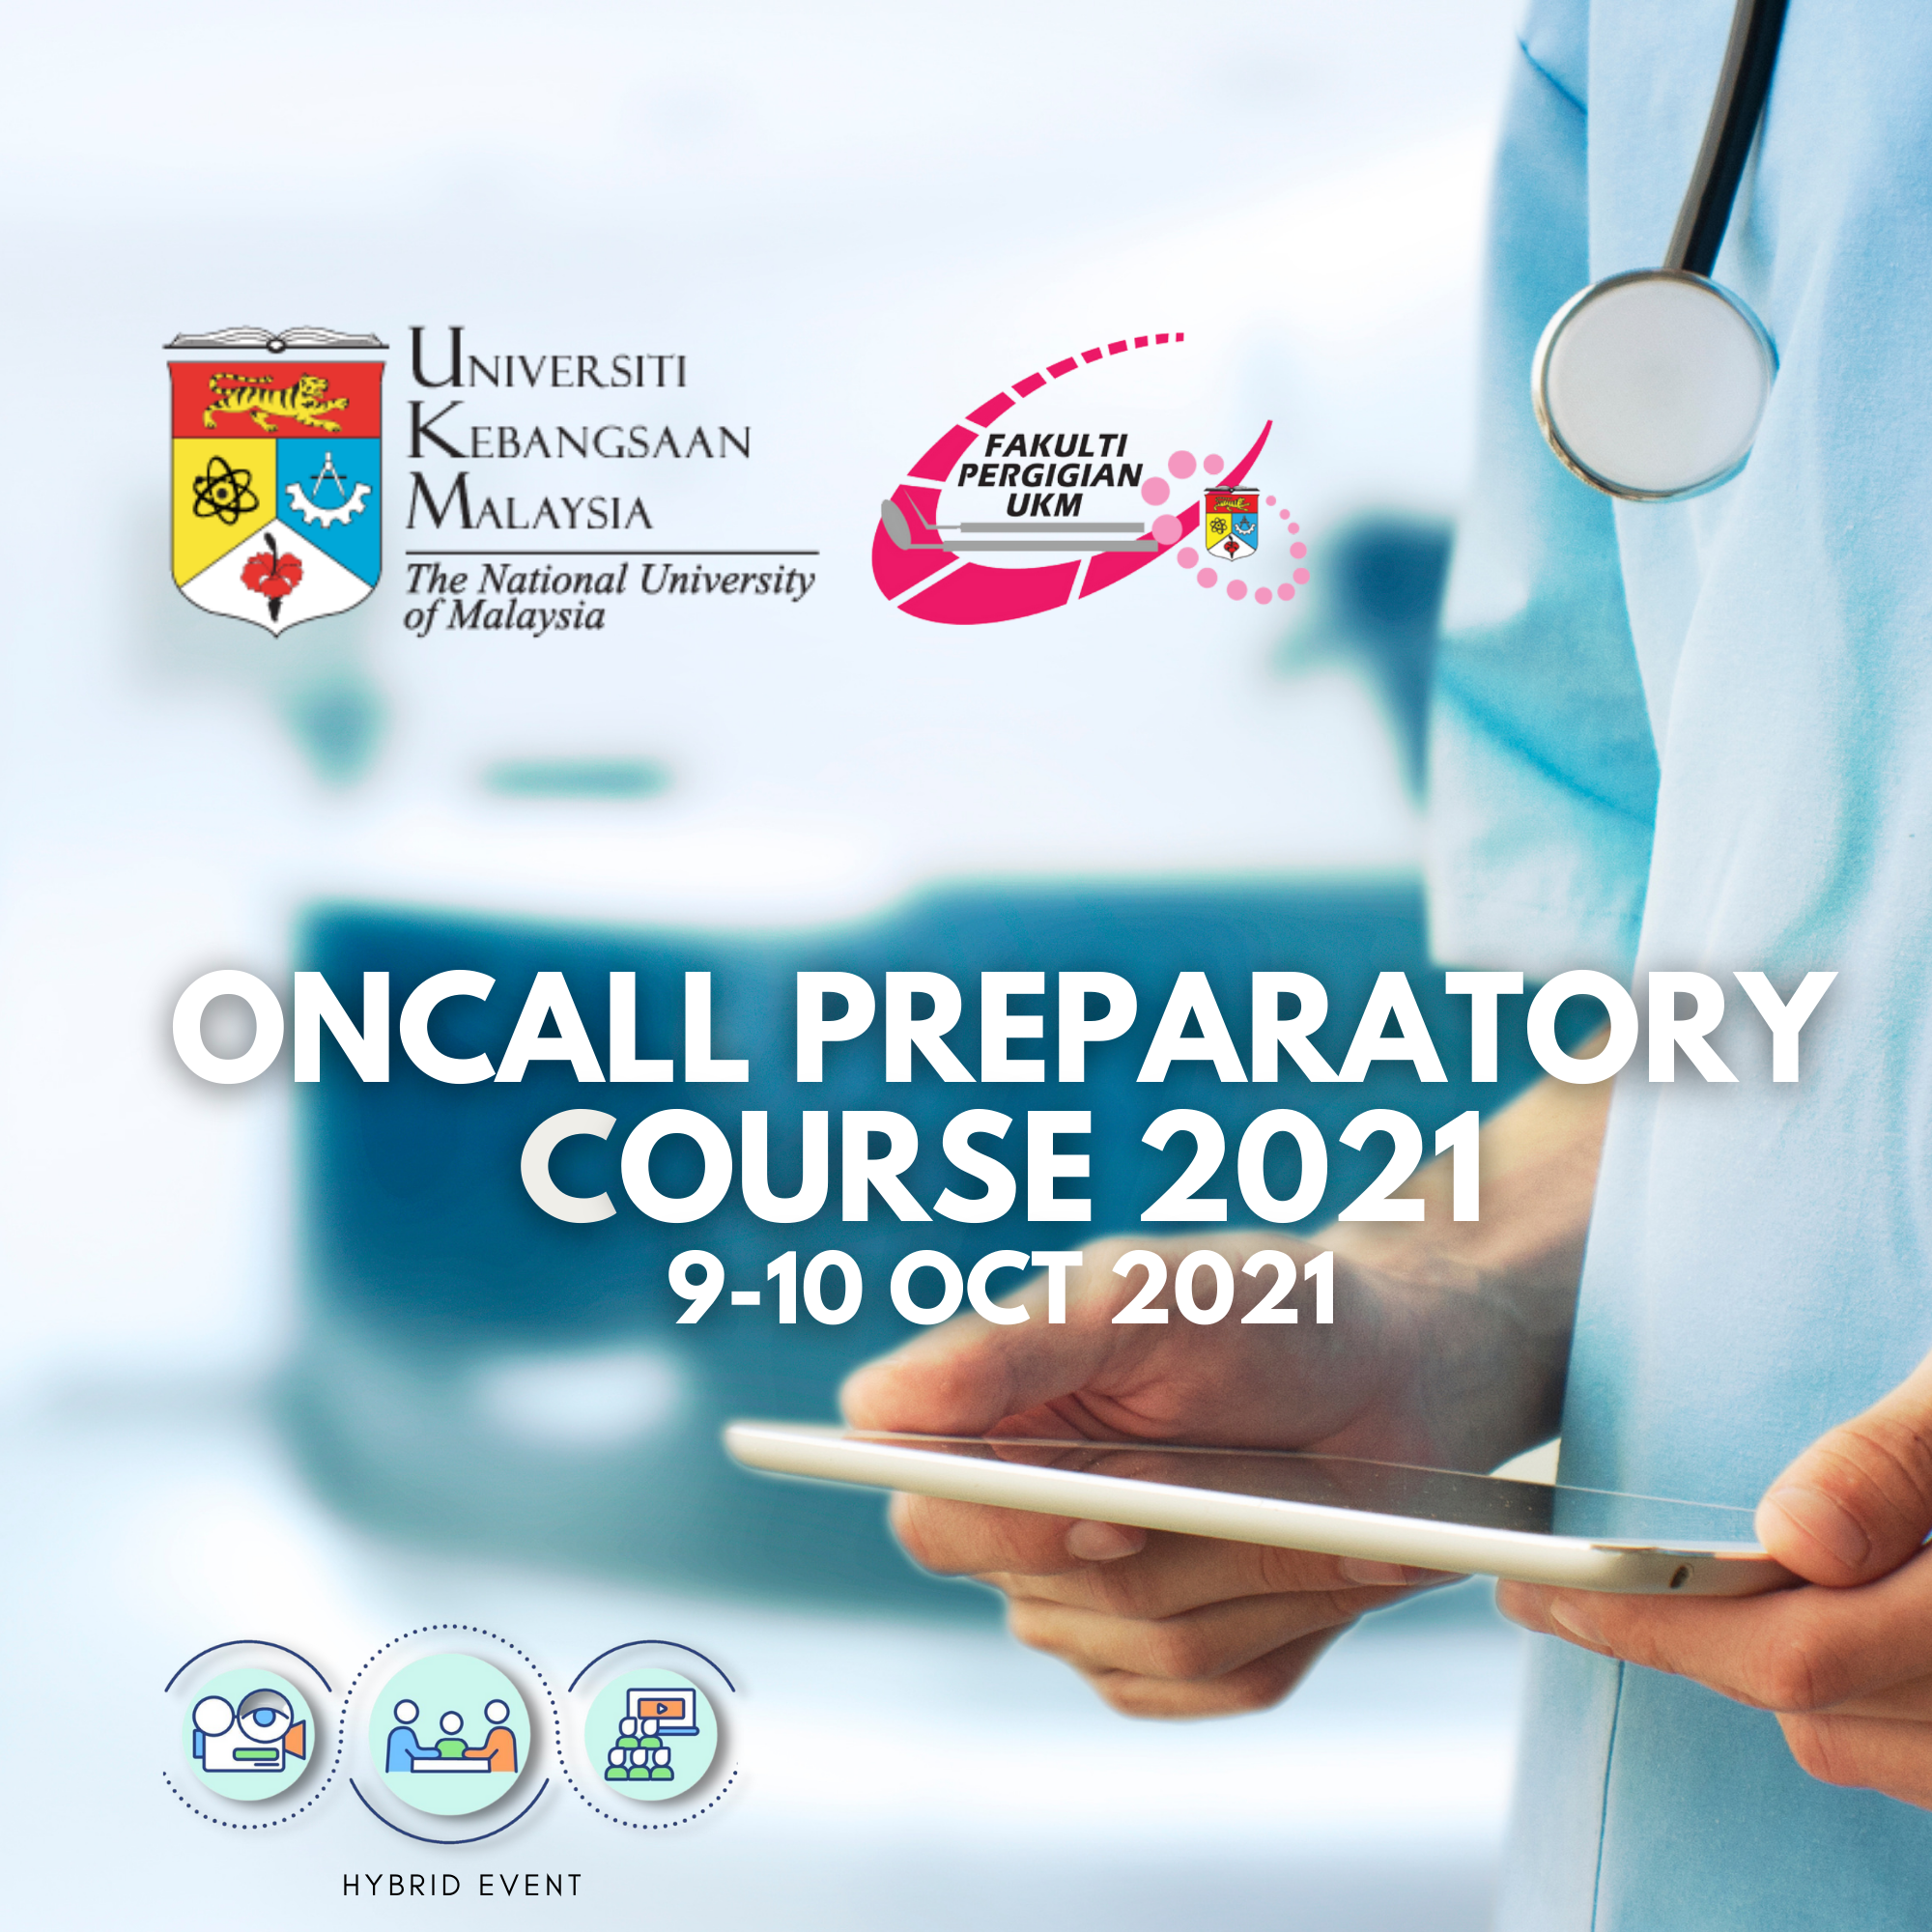 ONCALL PREPARATORY COURSE 2021